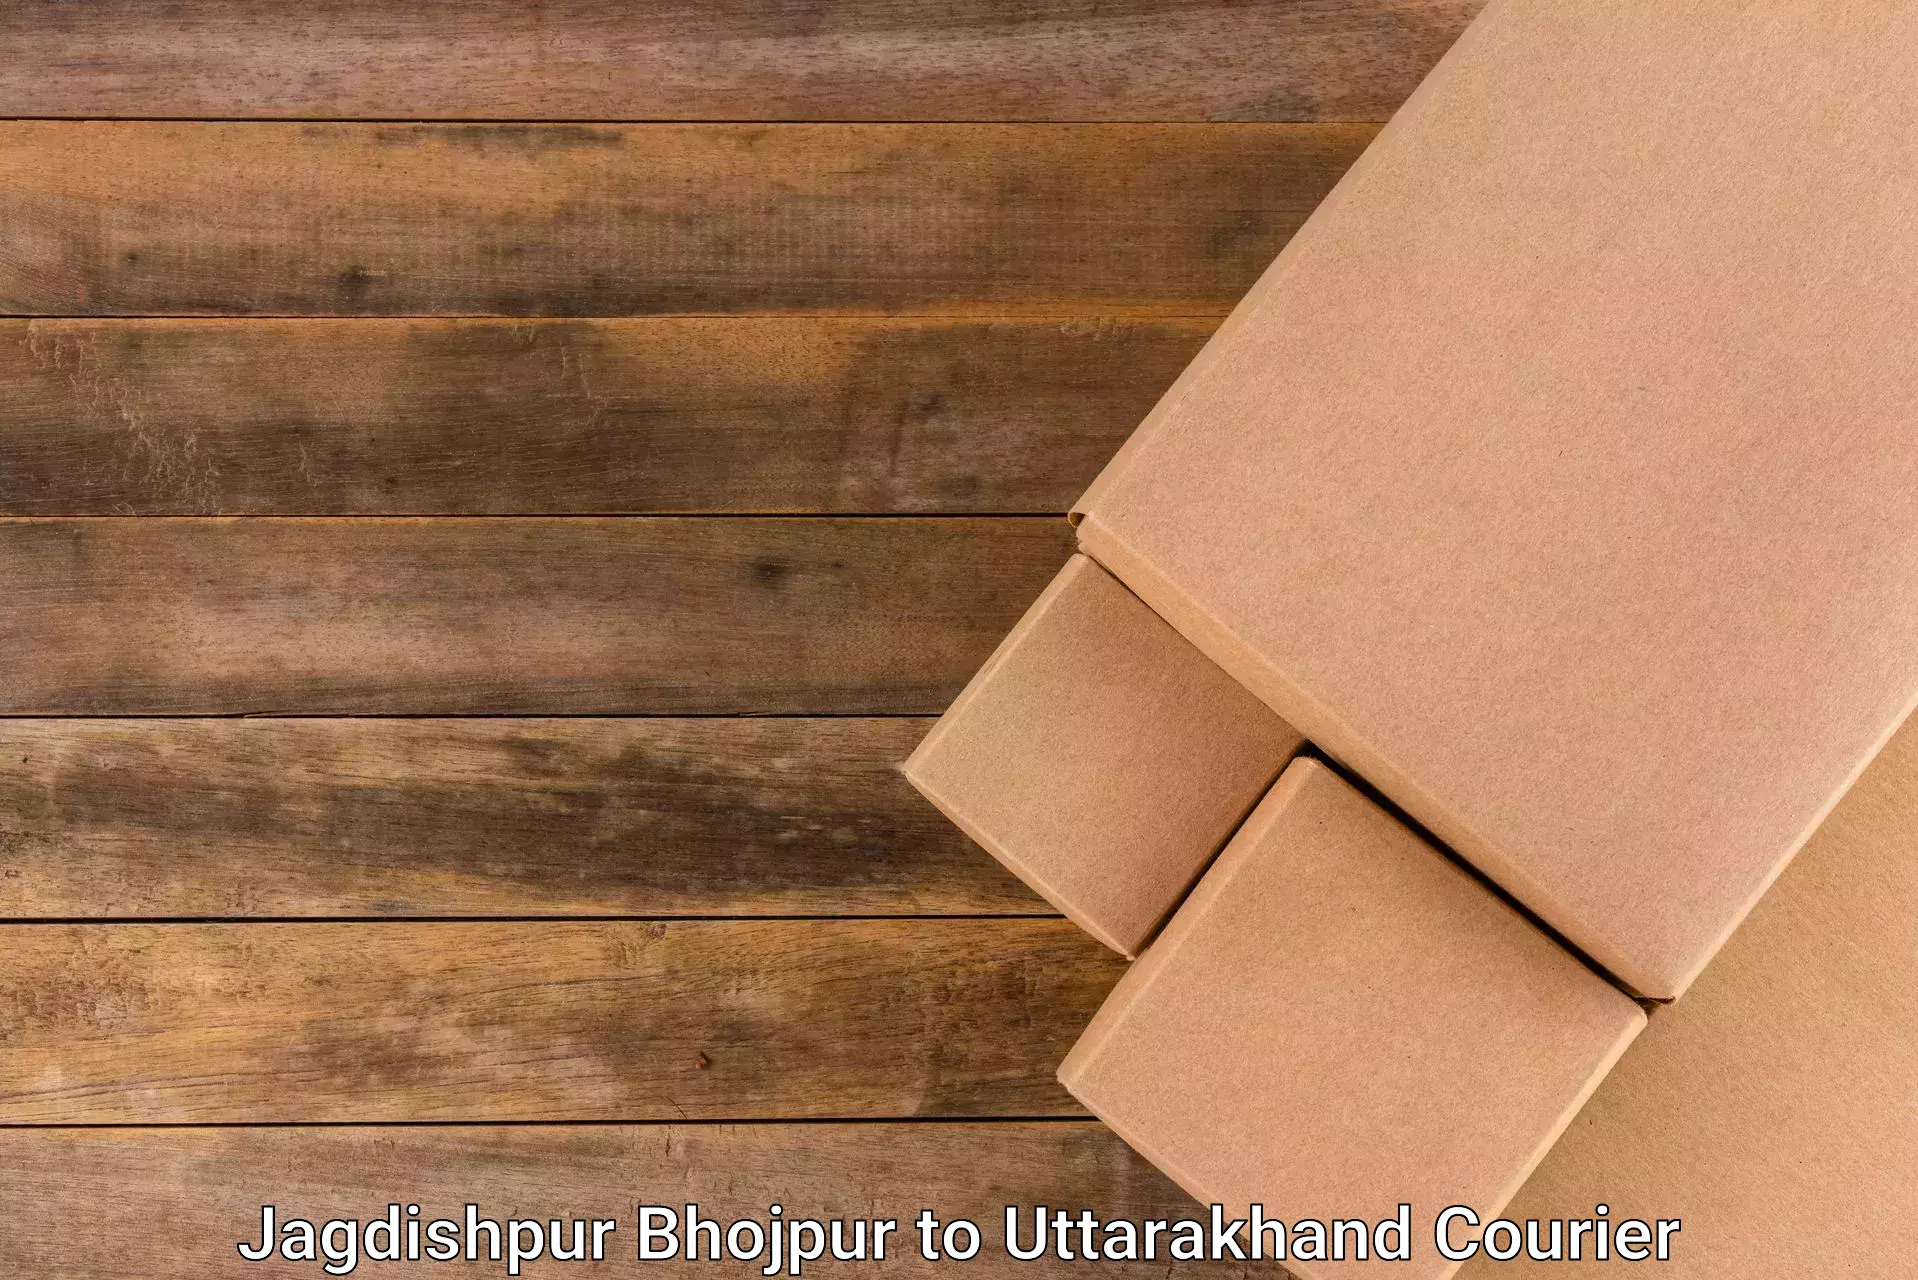 Special handling courier in Jagdishpur Bhojpur to Doiwala